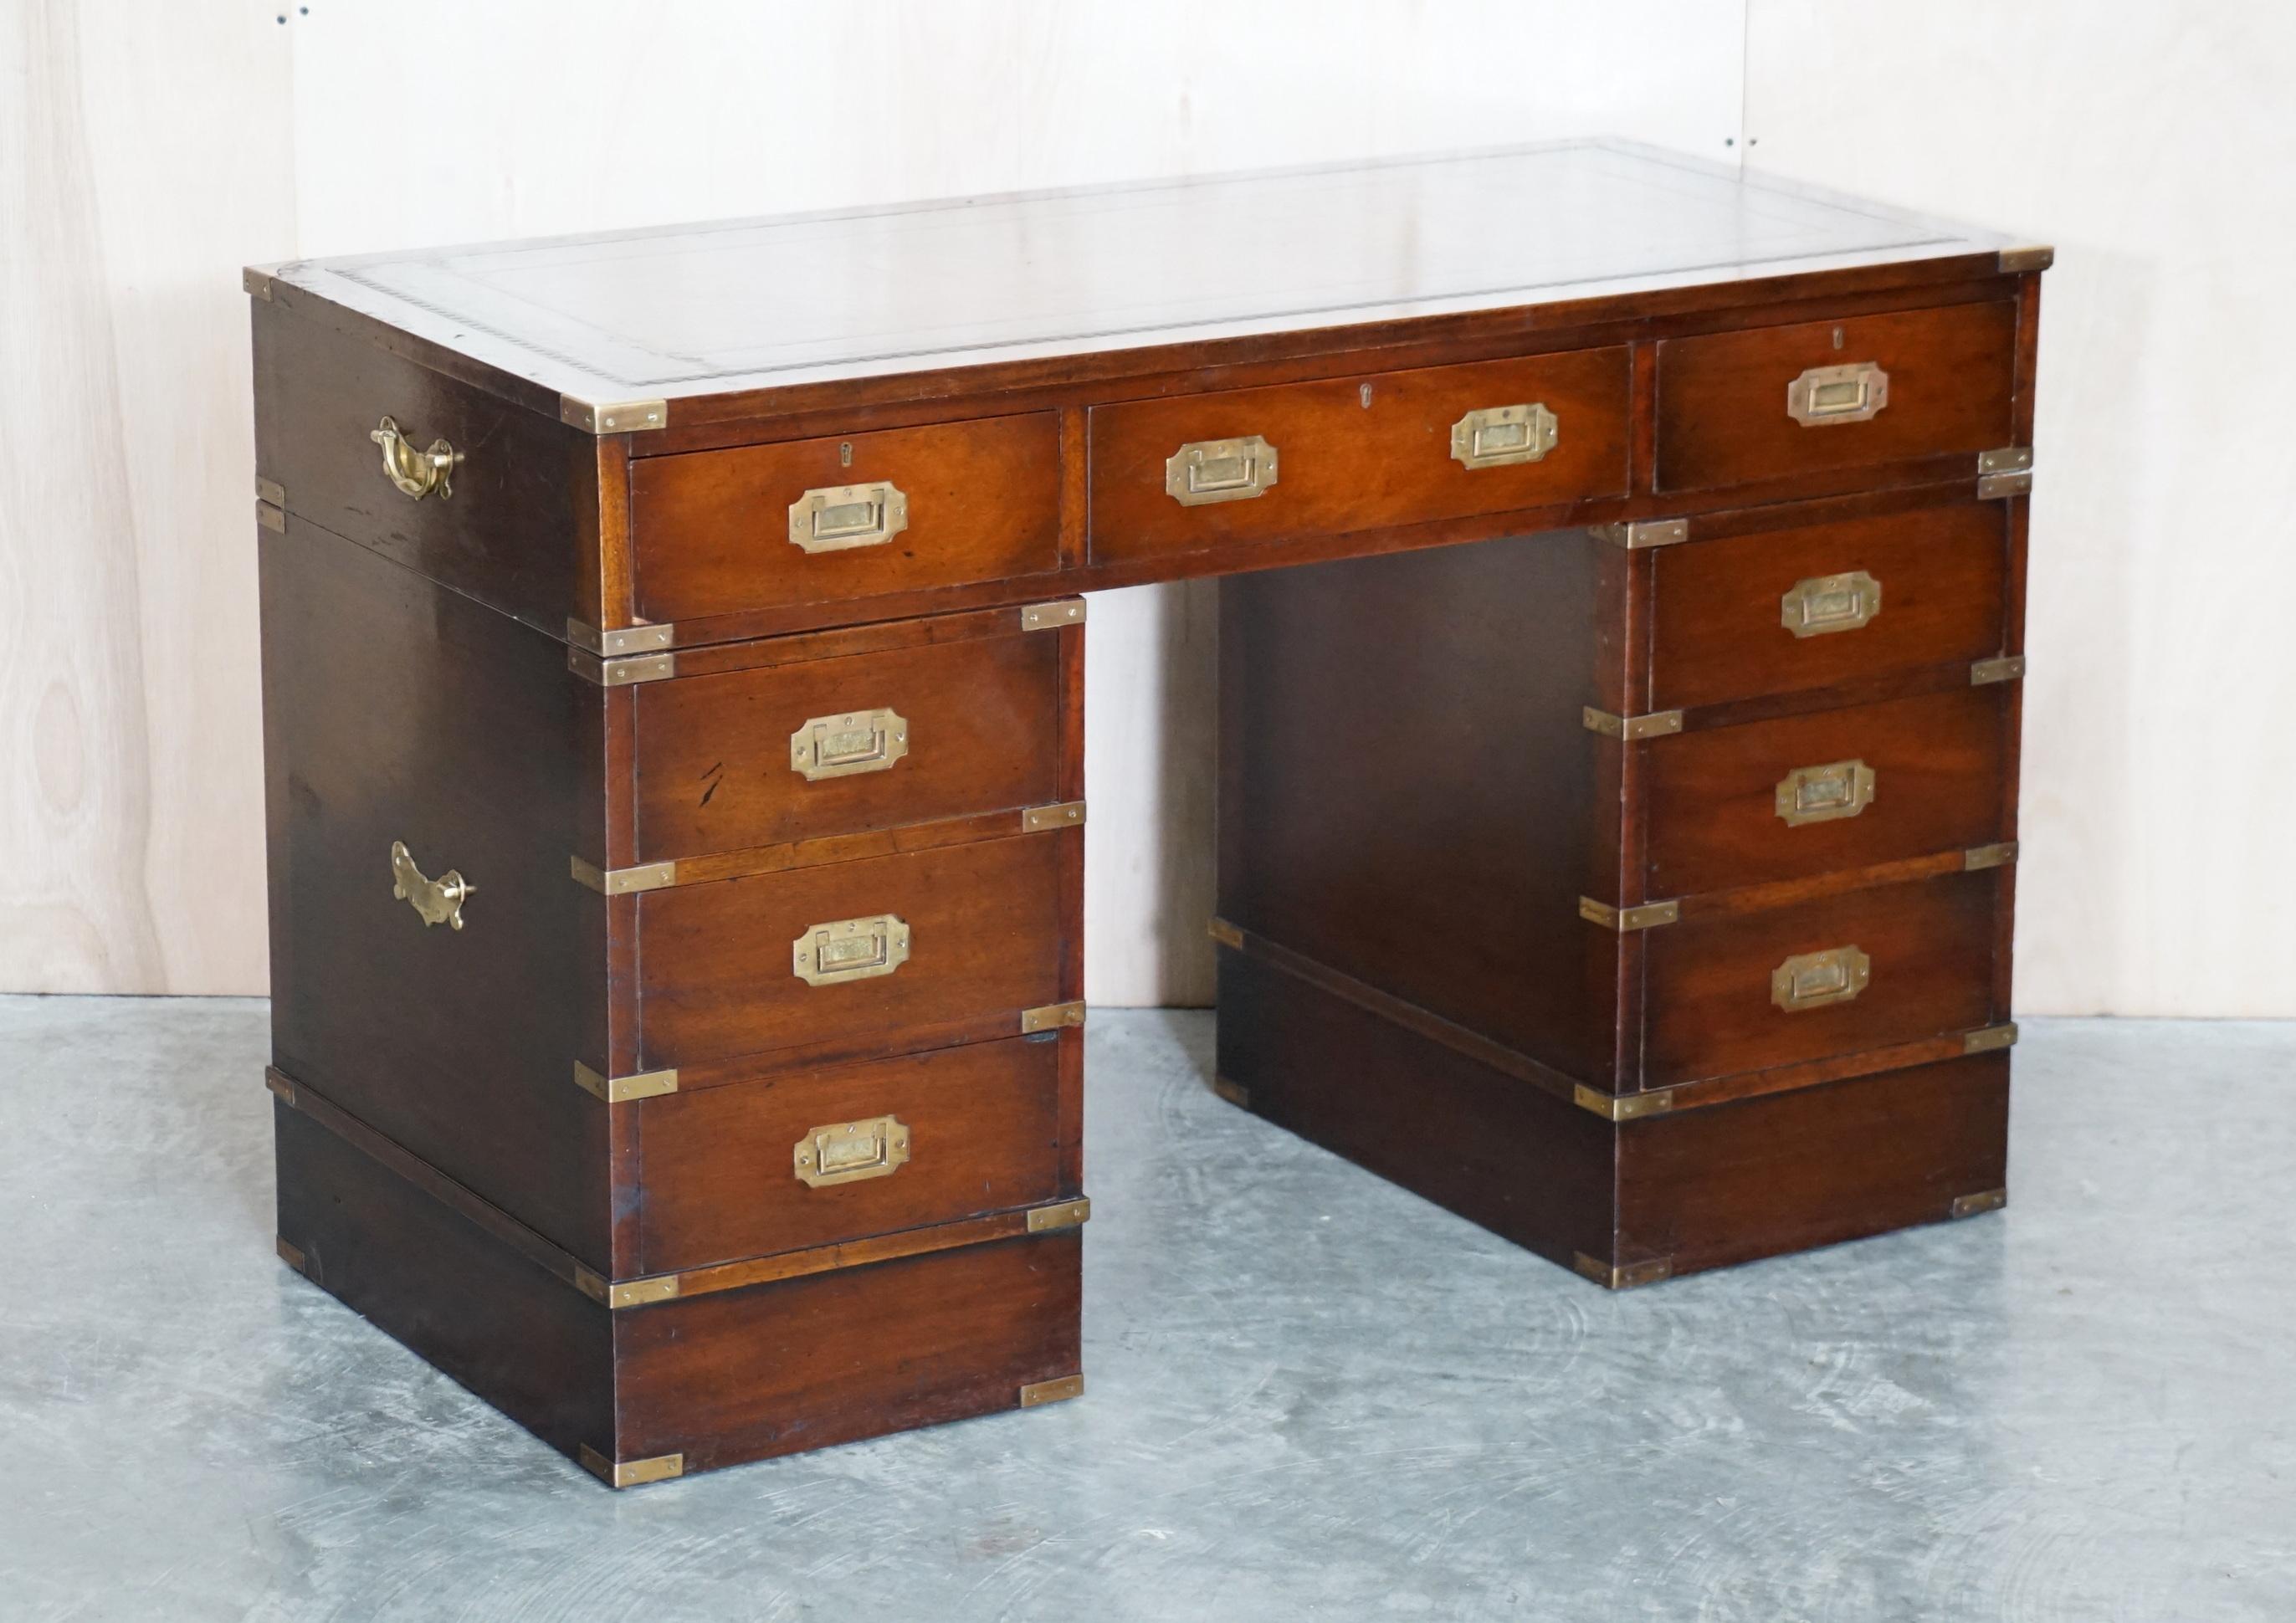 We are delighted to offer for sale this lovely vintage Military Campaign twin pedestal partners desk with hand dyed, cigar brown leather writing surface

This is a wonderful find, quite rare in the sense that its all drawers, 9 in total, usually